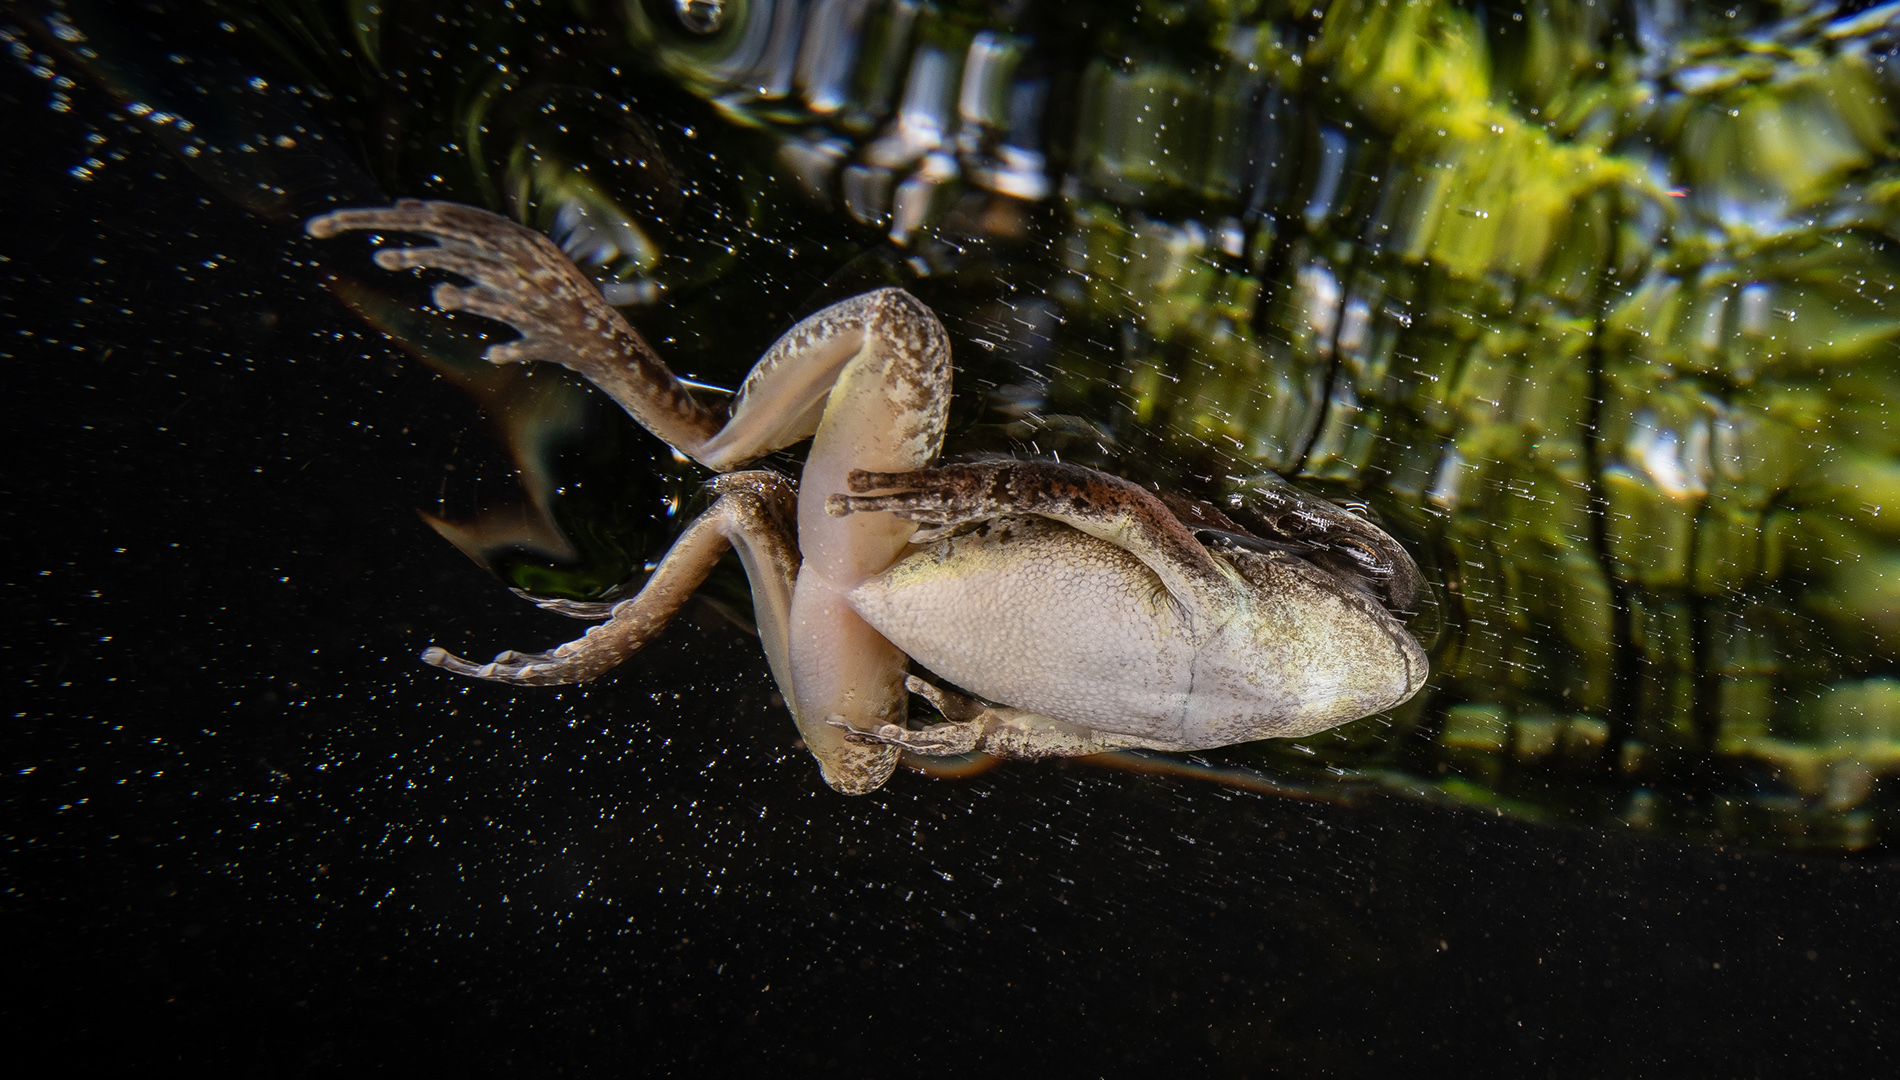 Stony Creek frog (Litoria lesueurii) swimming in a stream pool. Image credit: Alex Pike – Department of Planning and Environment.